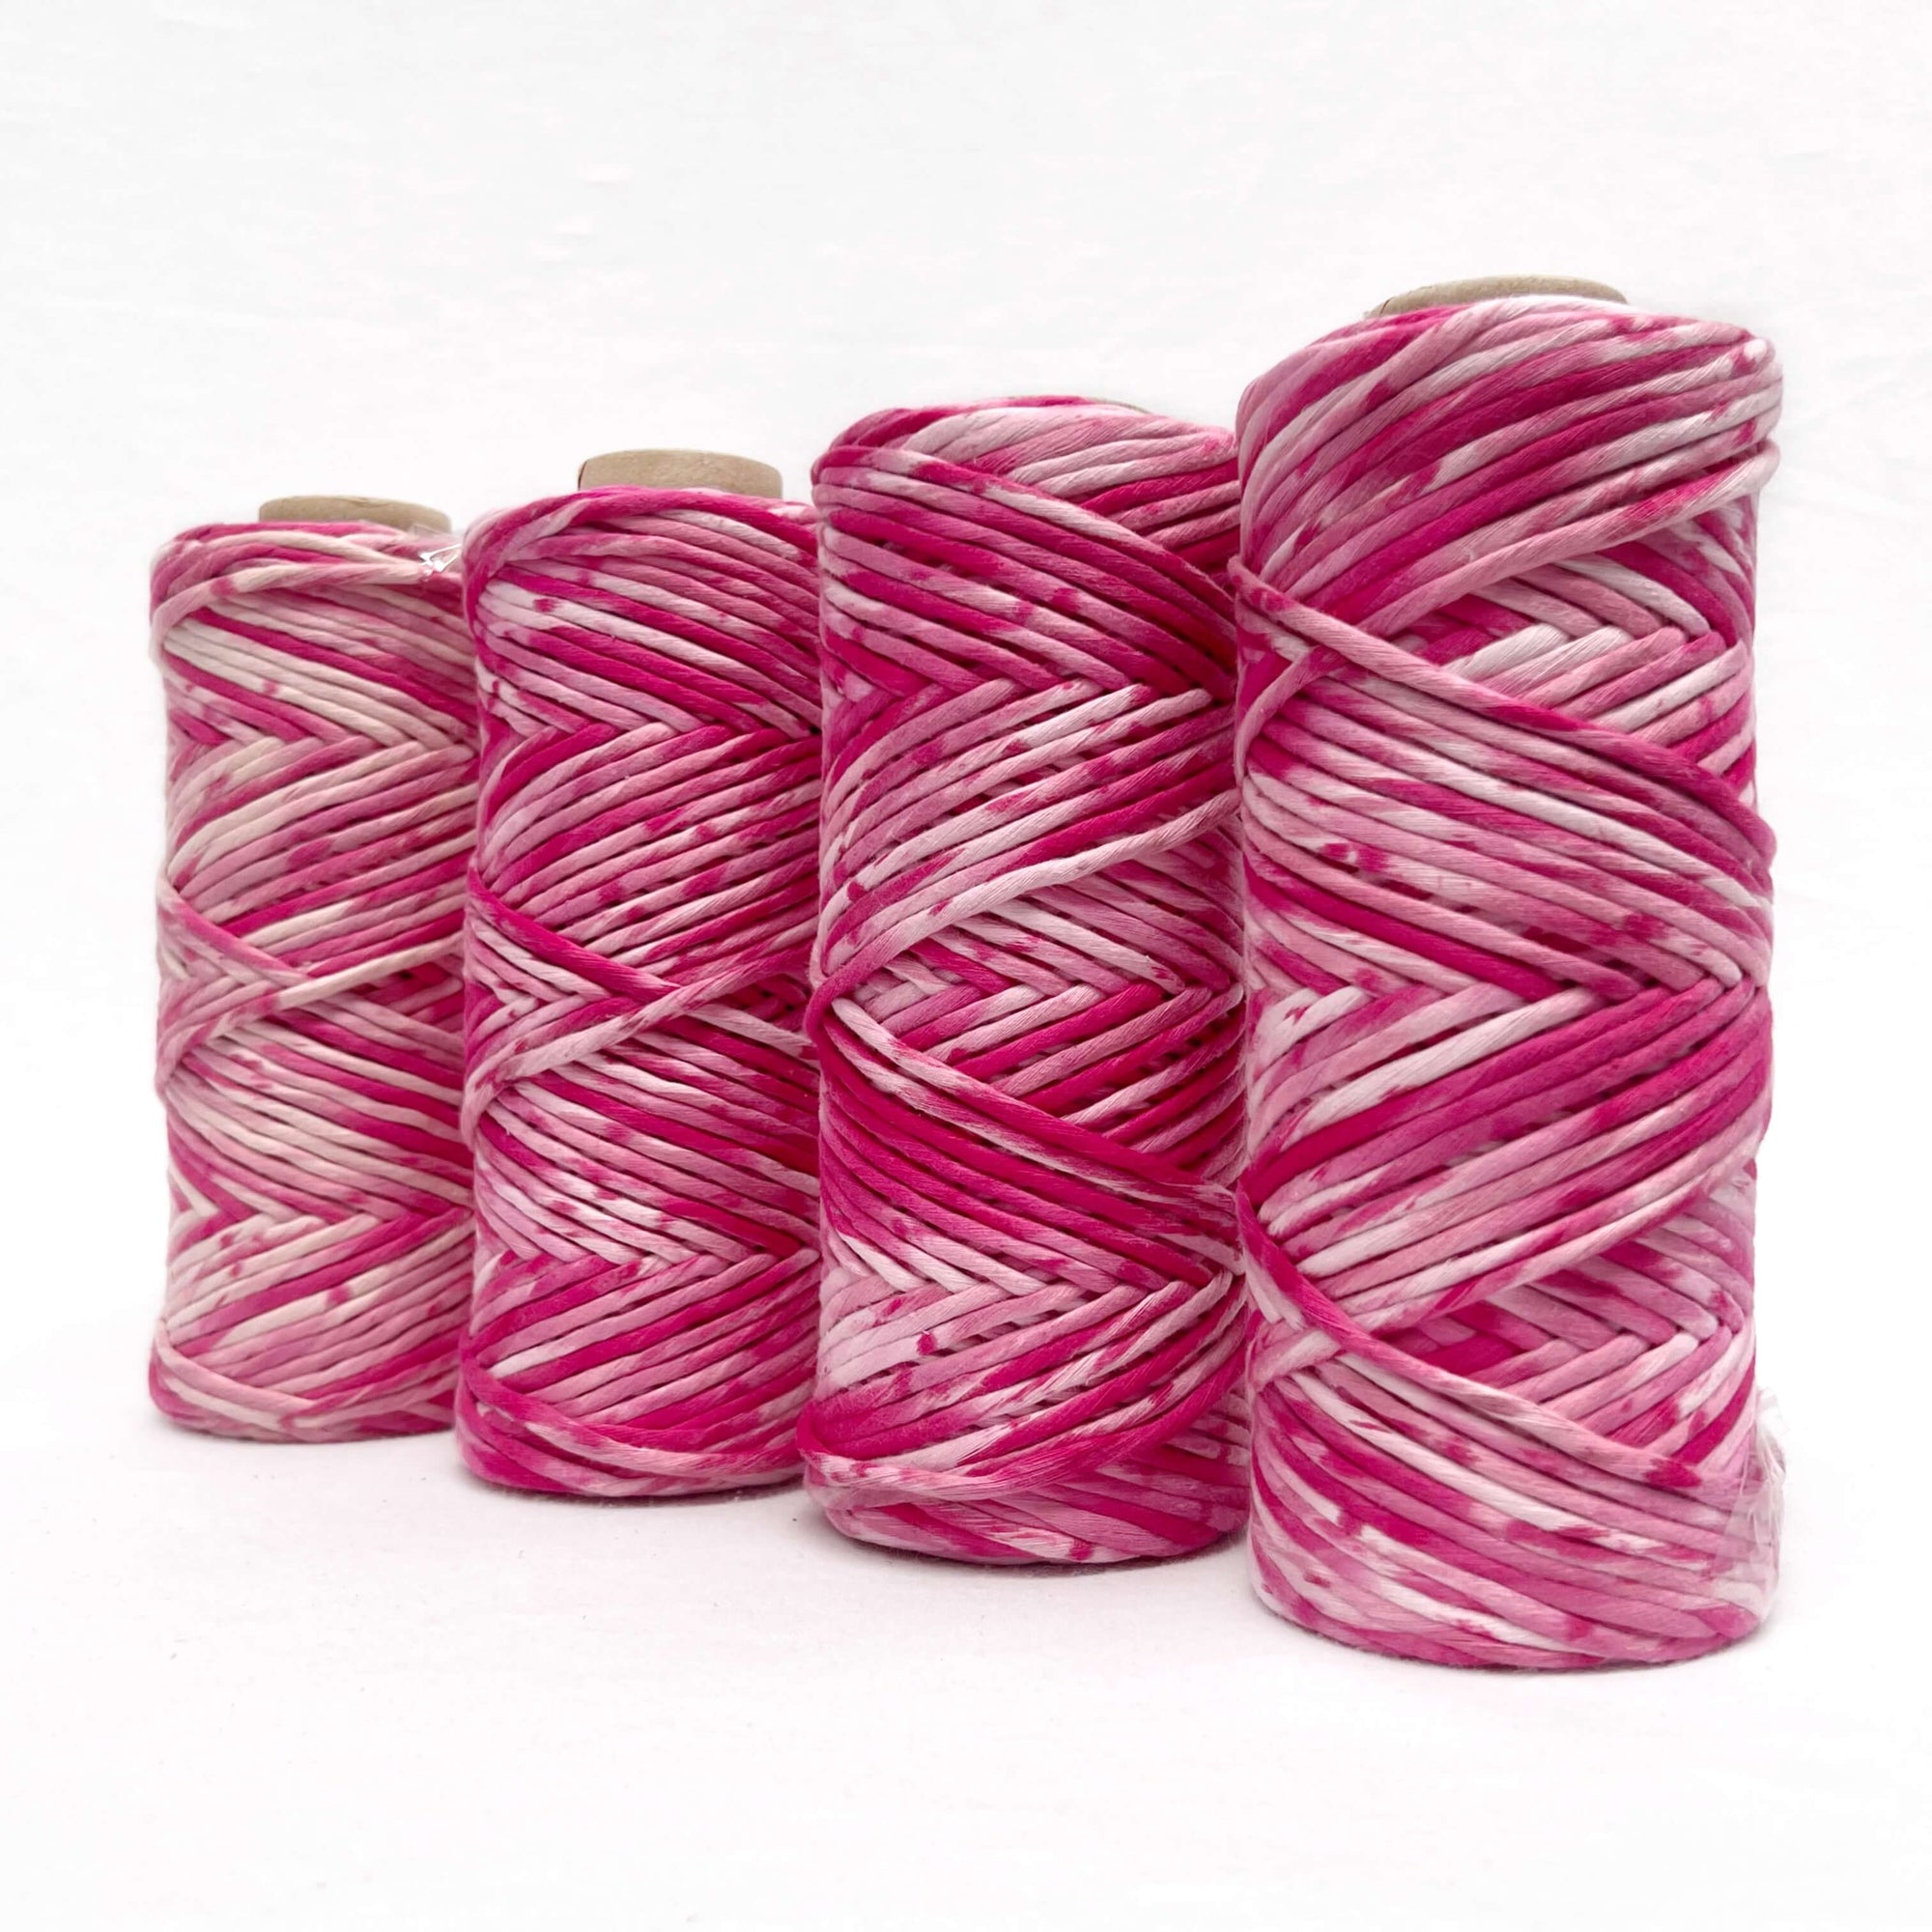 bright pink macrame cord standing in line against white wall